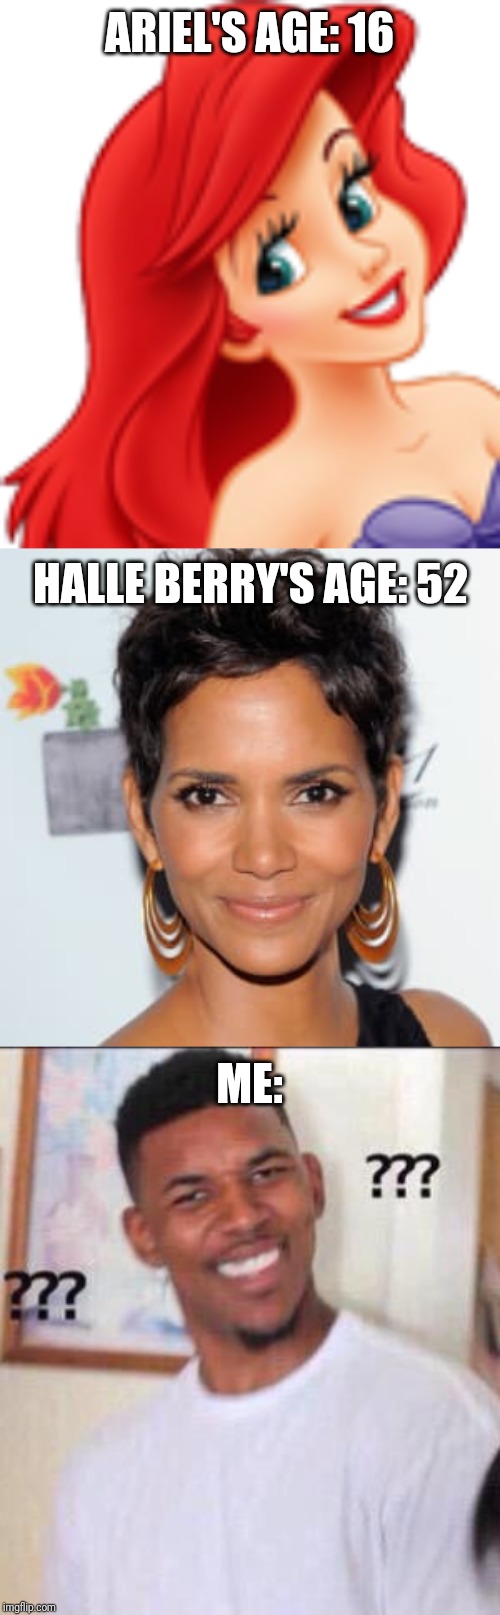 They cast... HALLE BERRY... As TEEN mermaid princess Ariel. What???? | ARIEL'S AGE: 16; HALLE BERRY'S AGE: 52; ME: | image tagged in black guy confused,memes,little mermaid,ariel,halle berry,disney | made w/ Imgflip meme maker